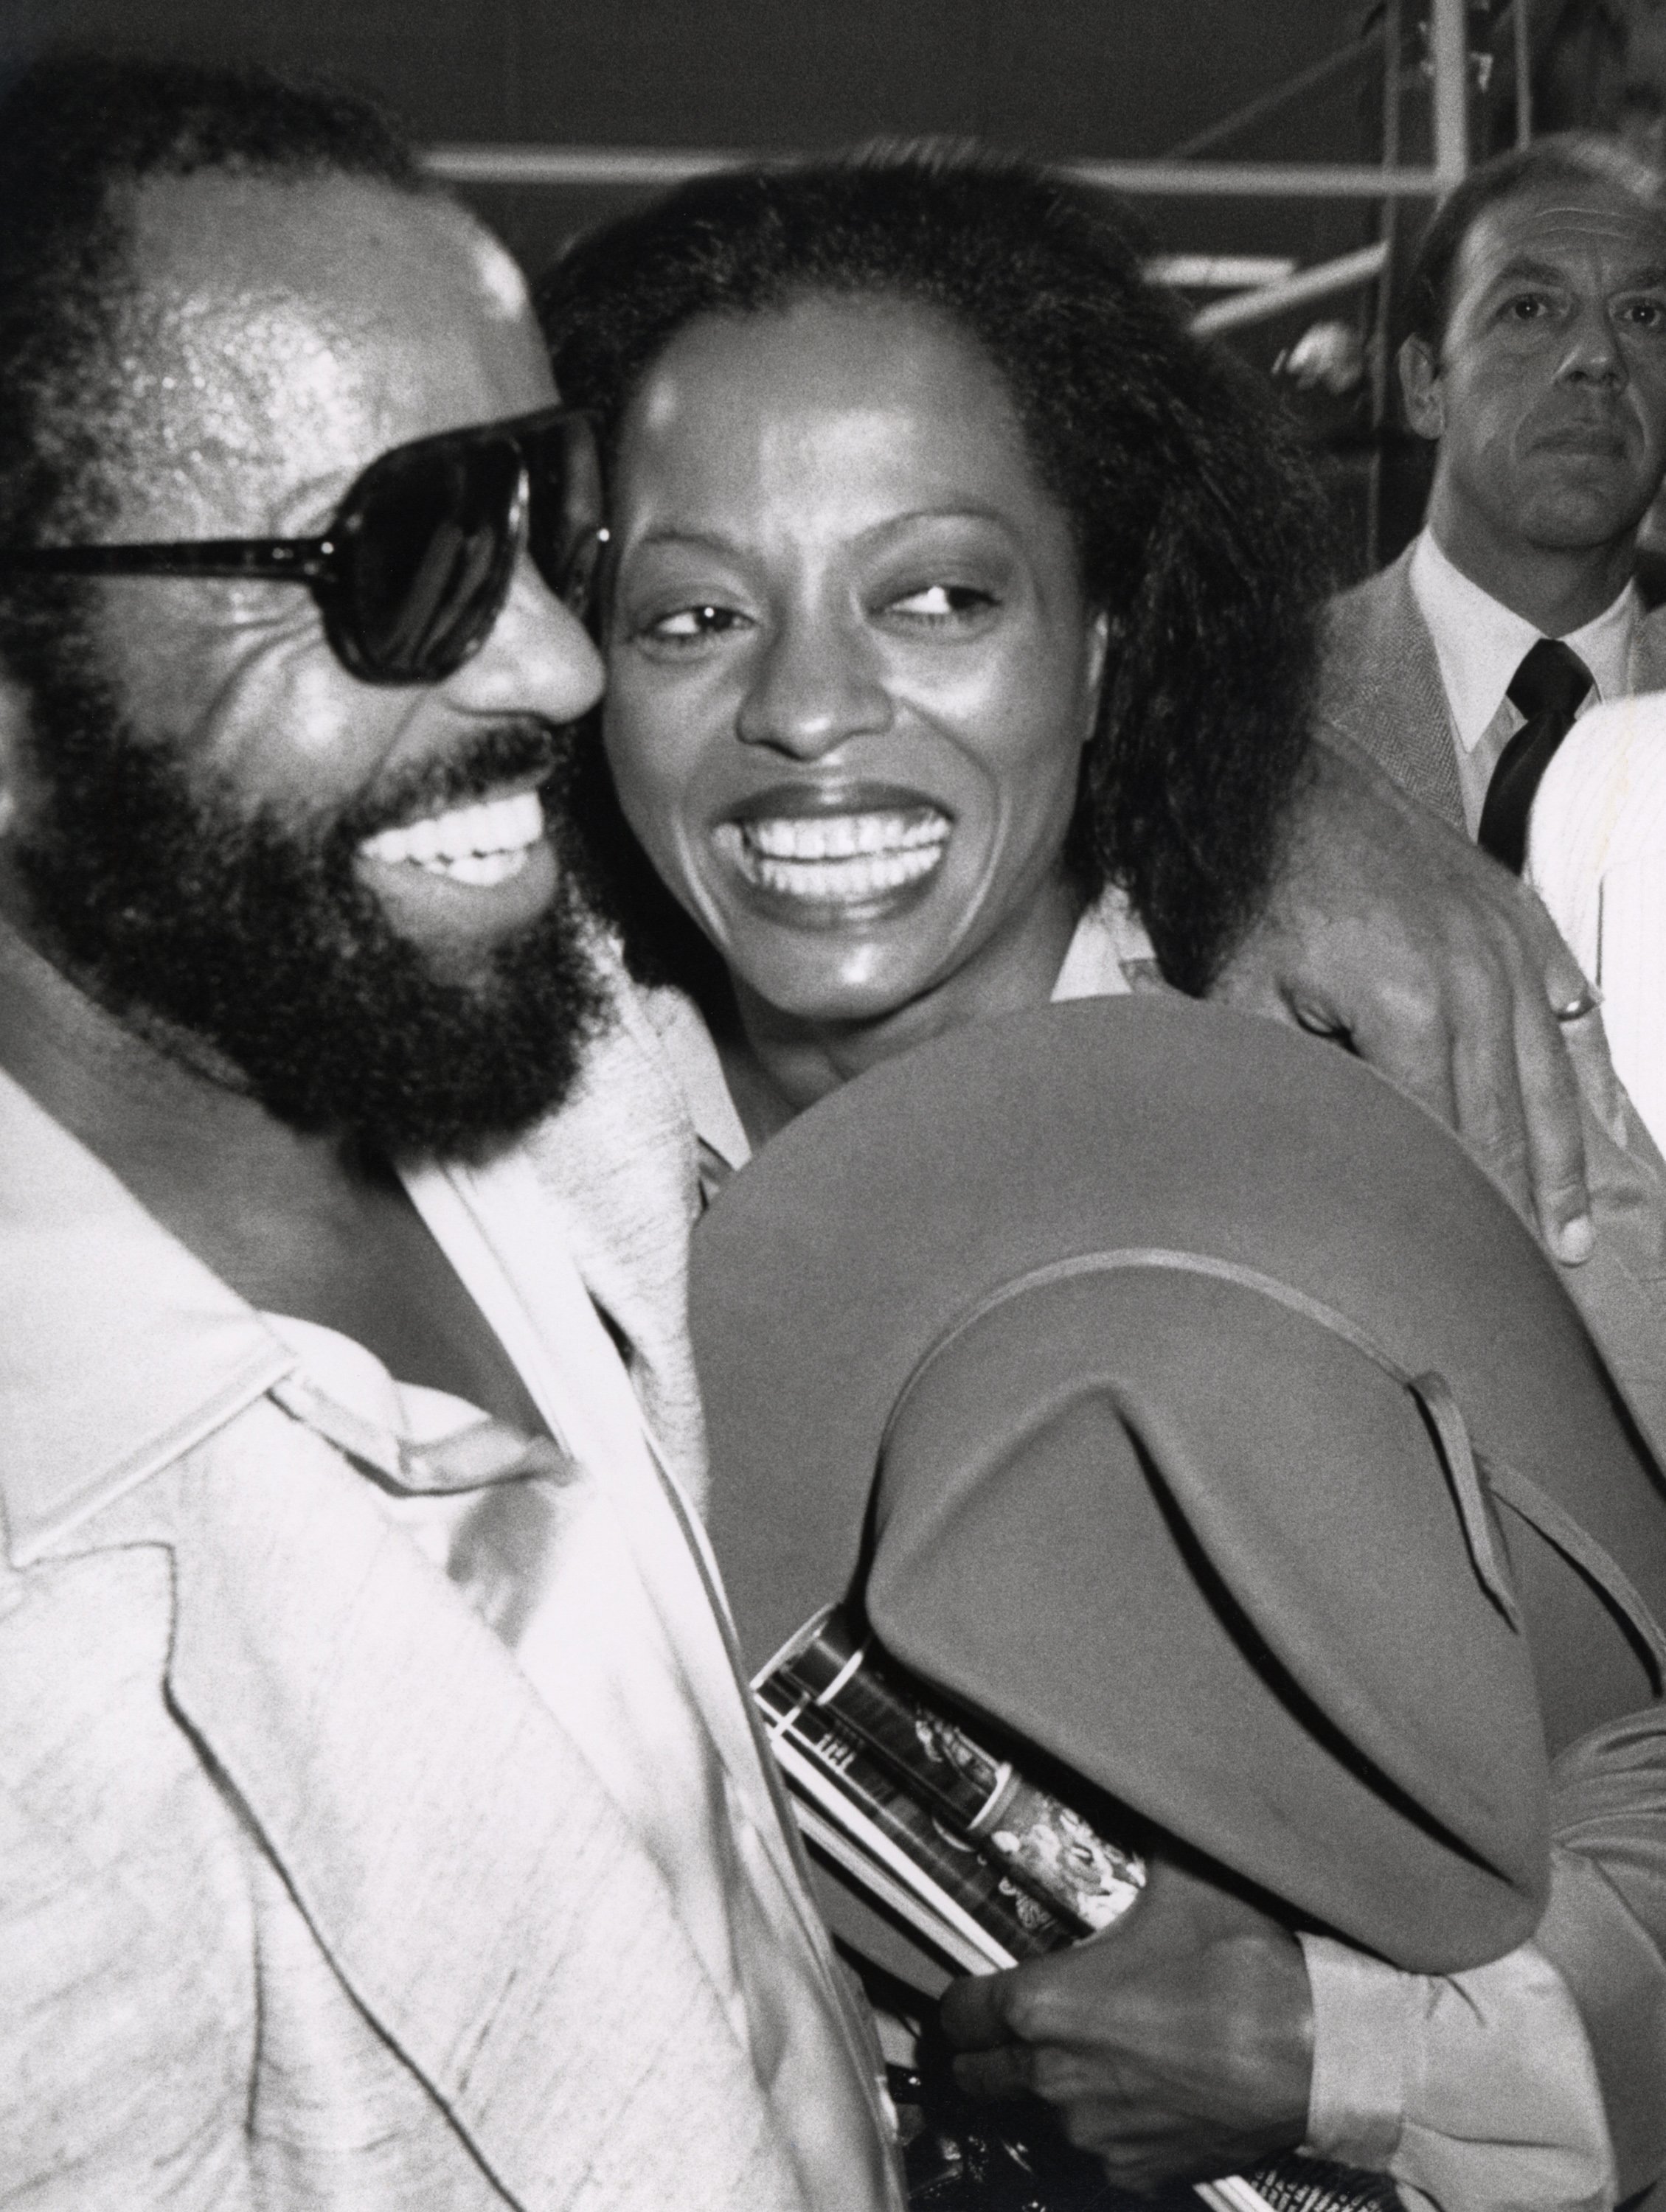 Berry Gordy and Diana Ross smiling and hugging each other while attending a boxing event.